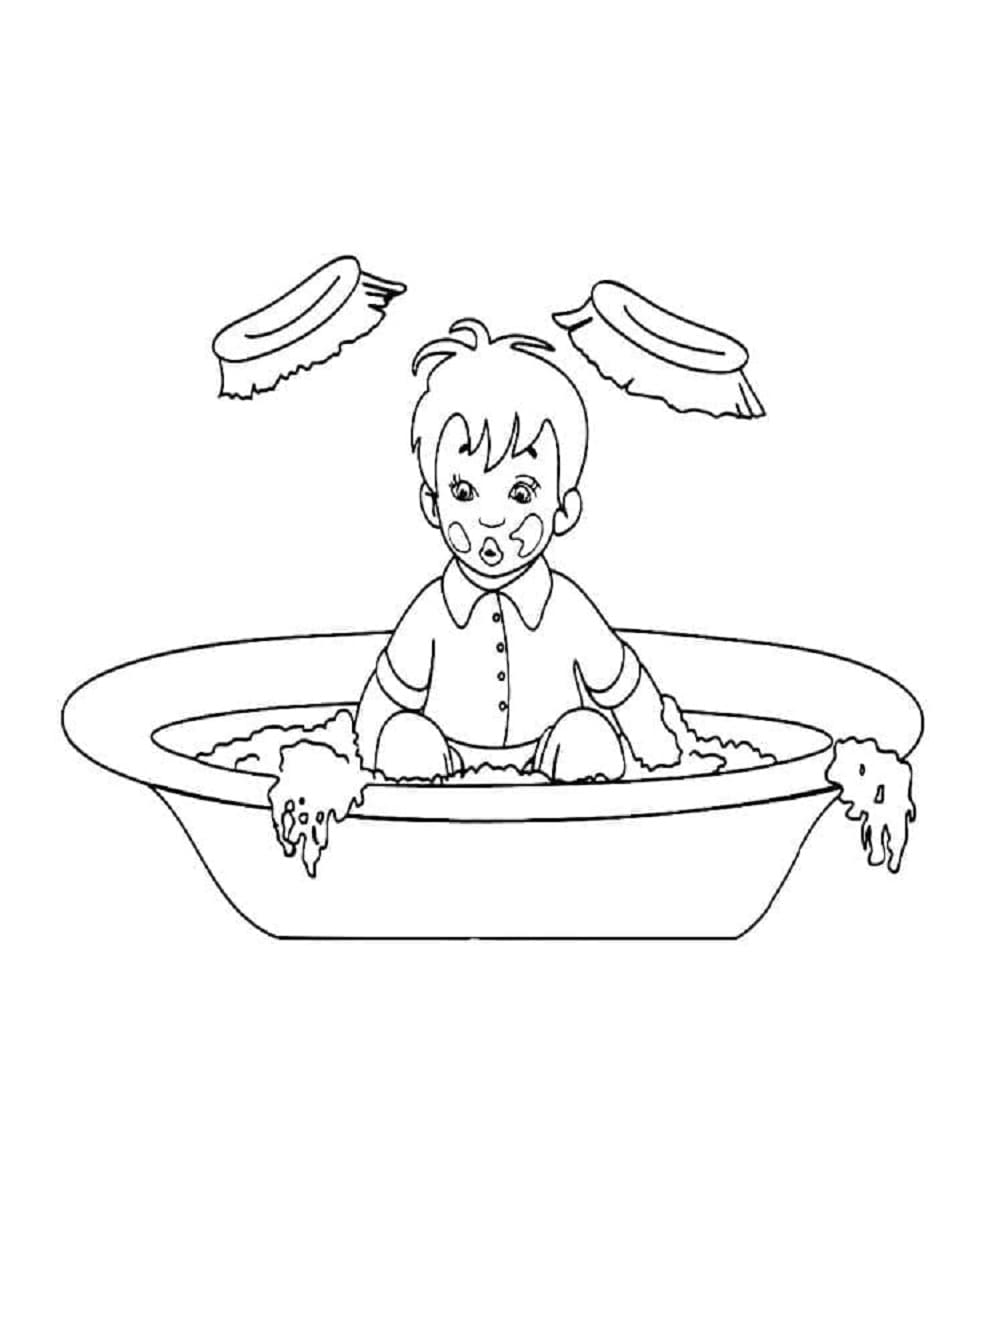 Download Free Printable Hygiene Coloring Page